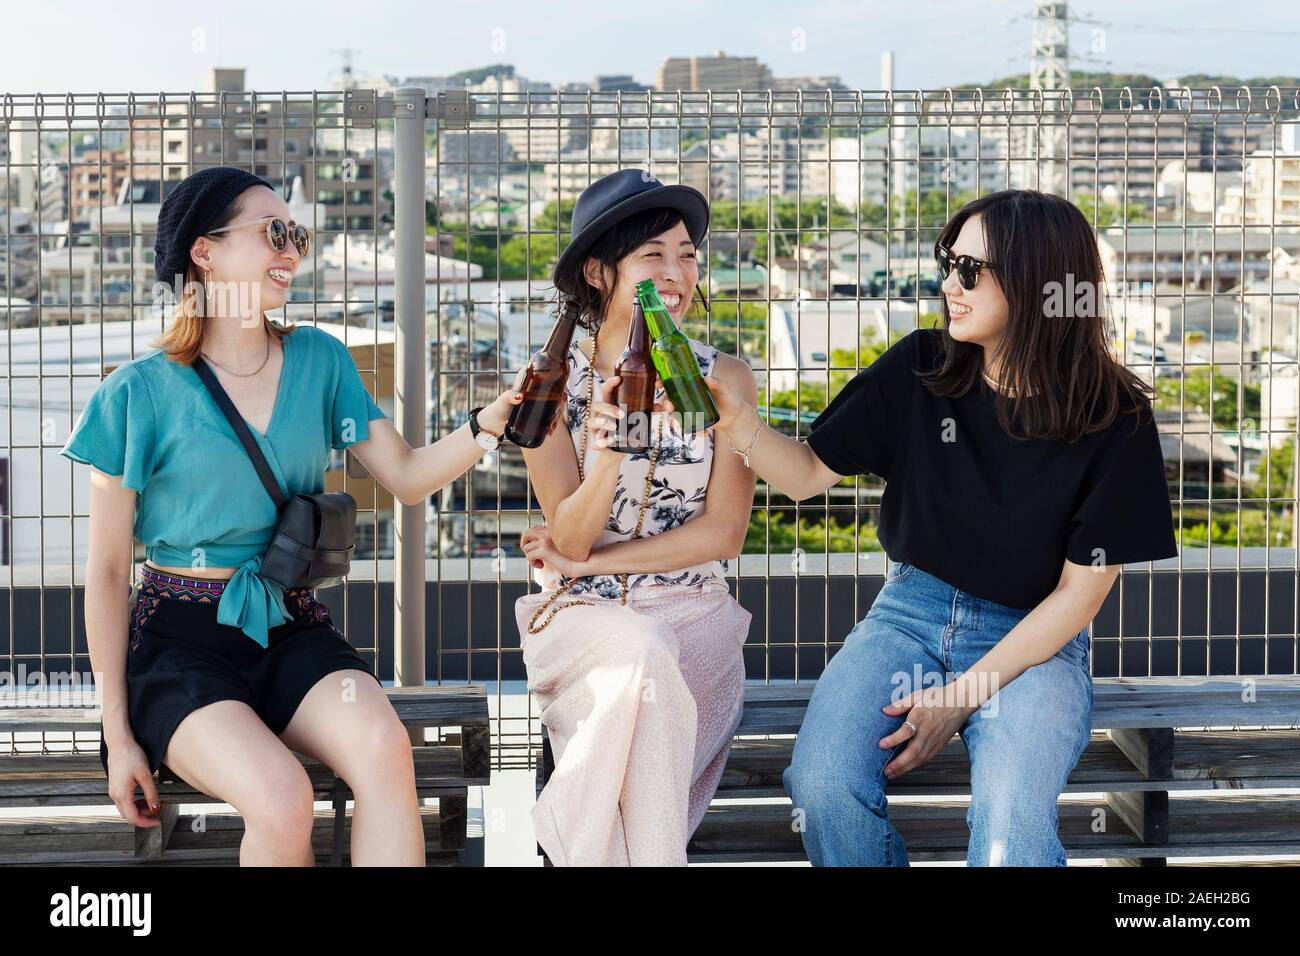 Three young Japanese women sitting on a rooftop in an urban setting, drinking beer. Stock Photo